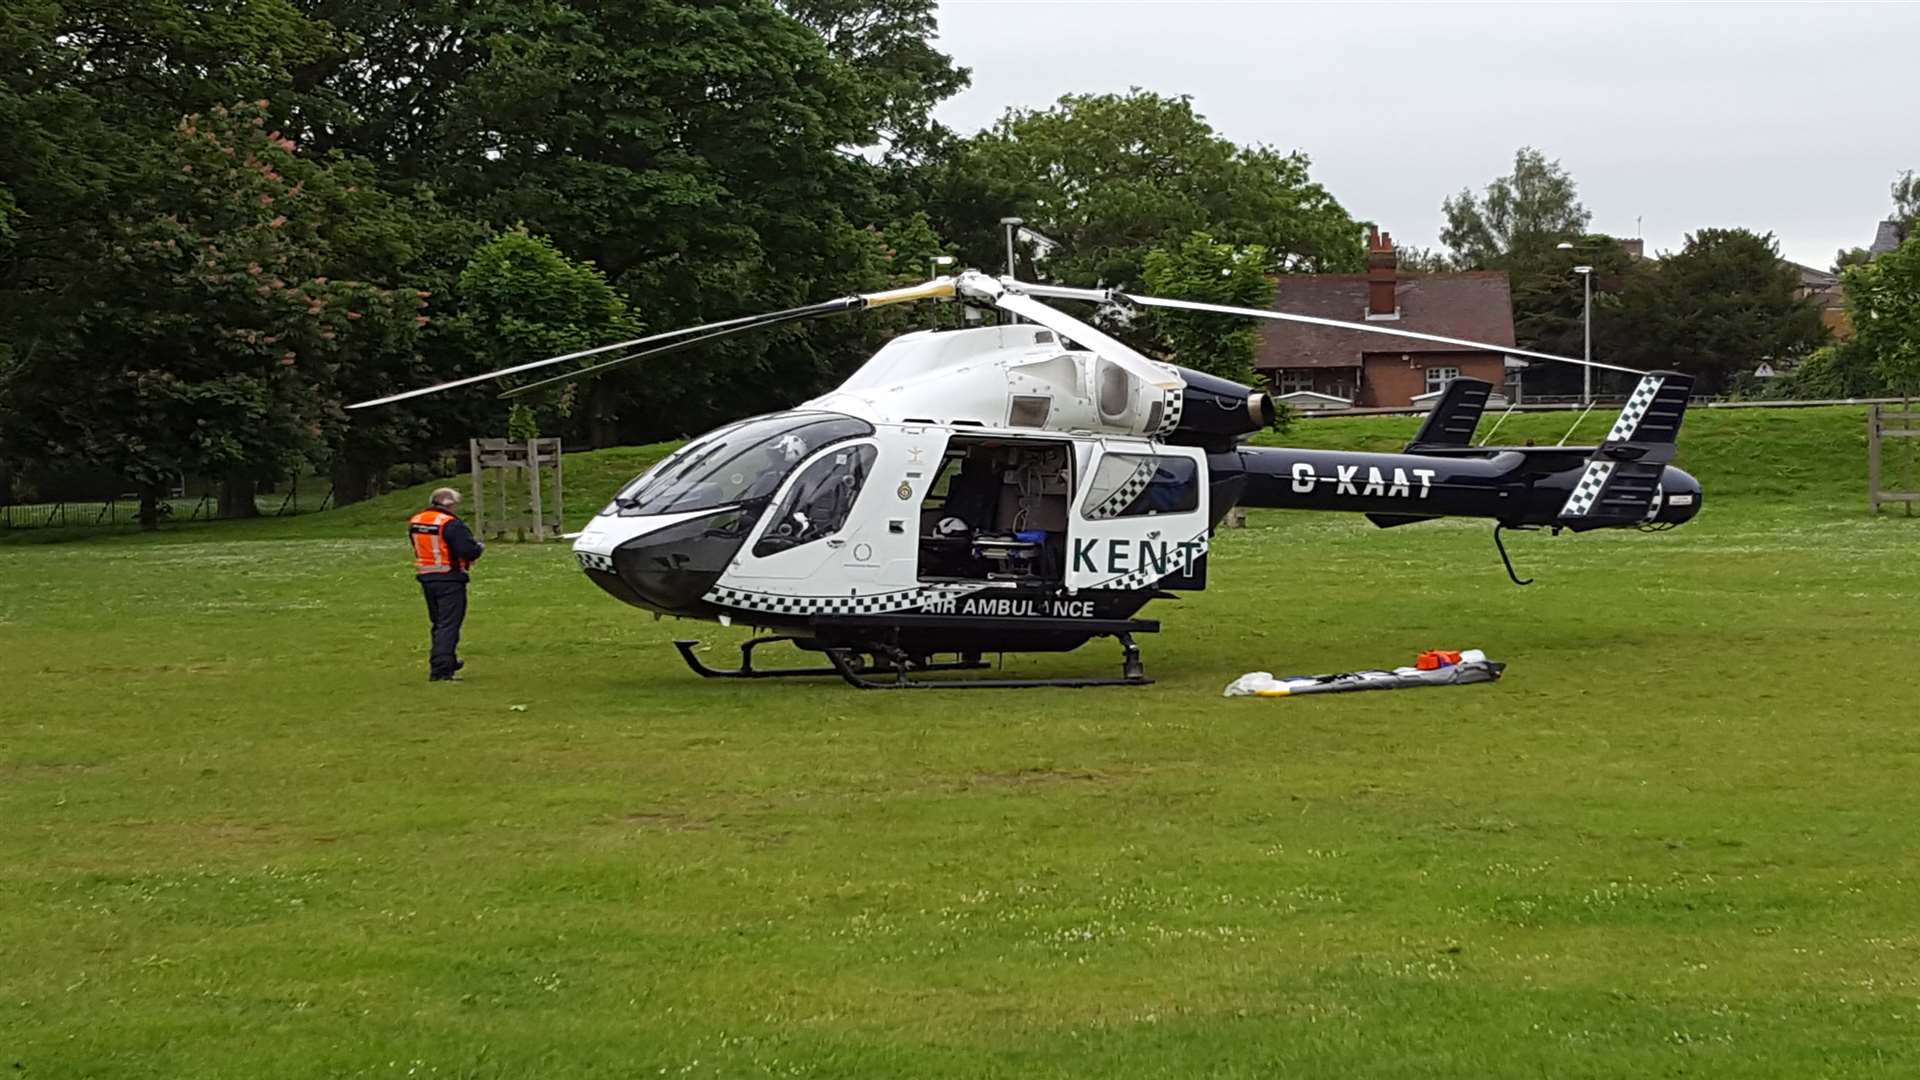 The air ambulance landed nearby